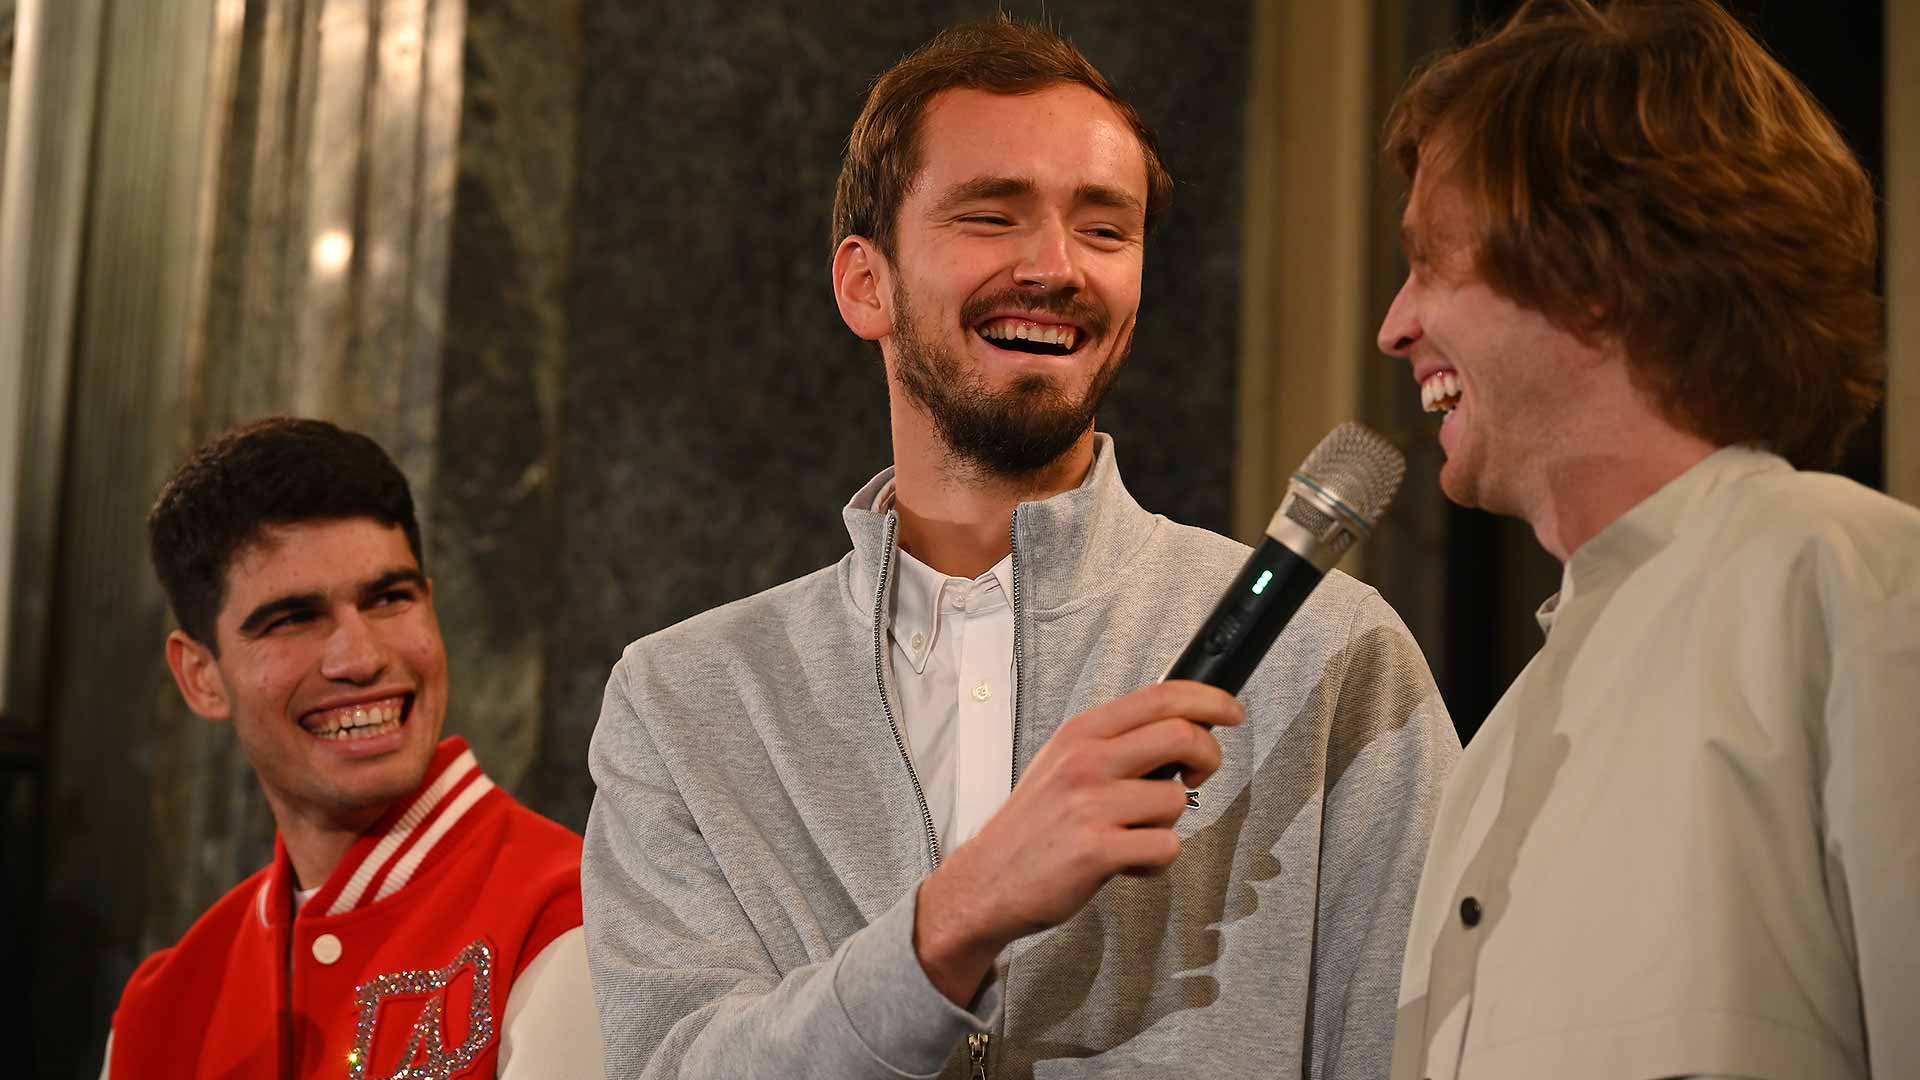 Daniil Medvedev shares a joke with close friend Andrey Rublev on media day in Turin.